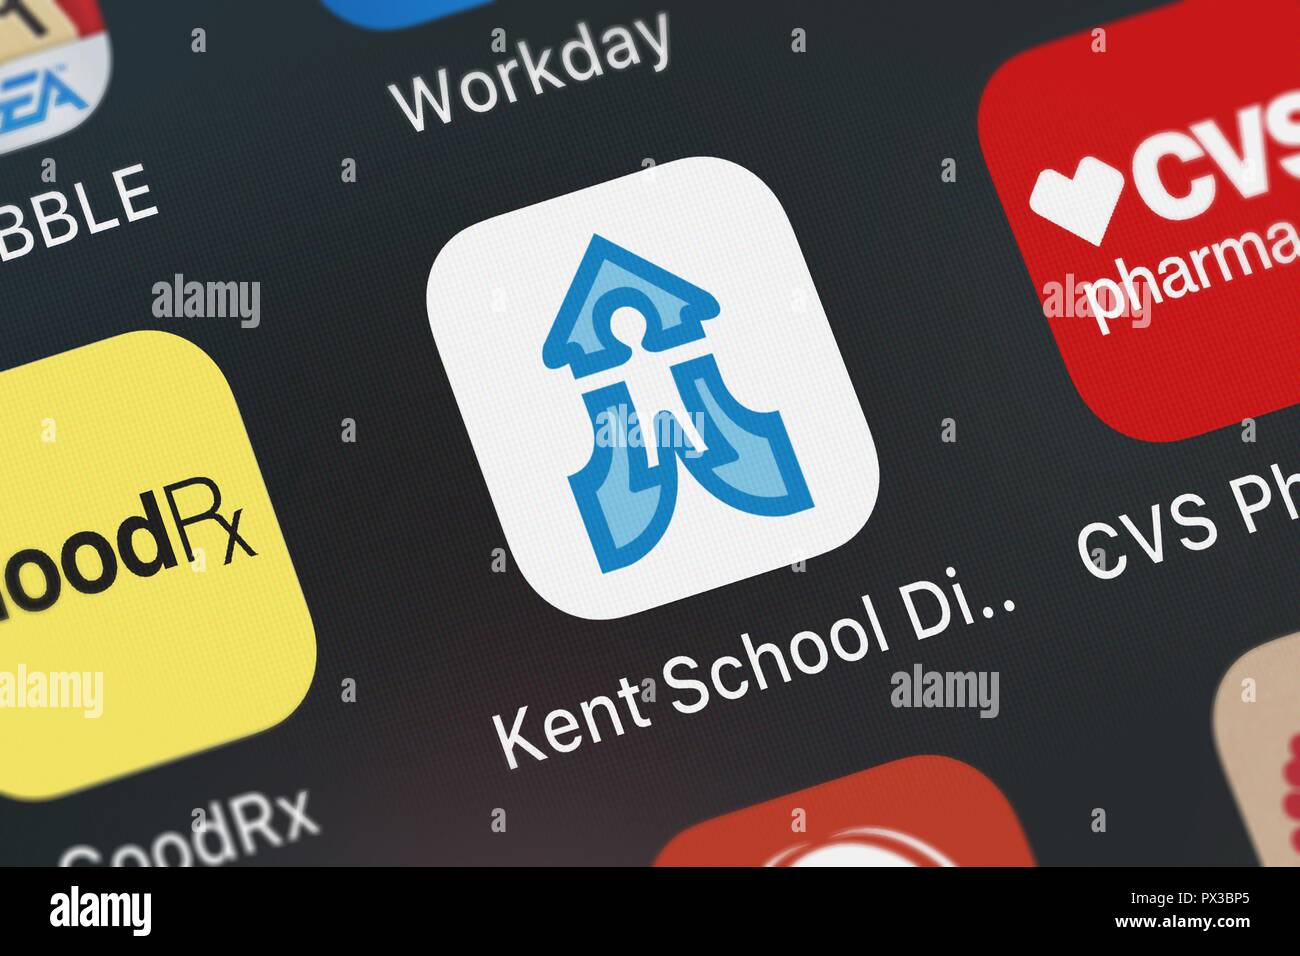 London, United Kingdom - October 19, 2018: Close-up shot of the Kent School District application icon from Blackboard Inc. on an iPhone. Stock Photo